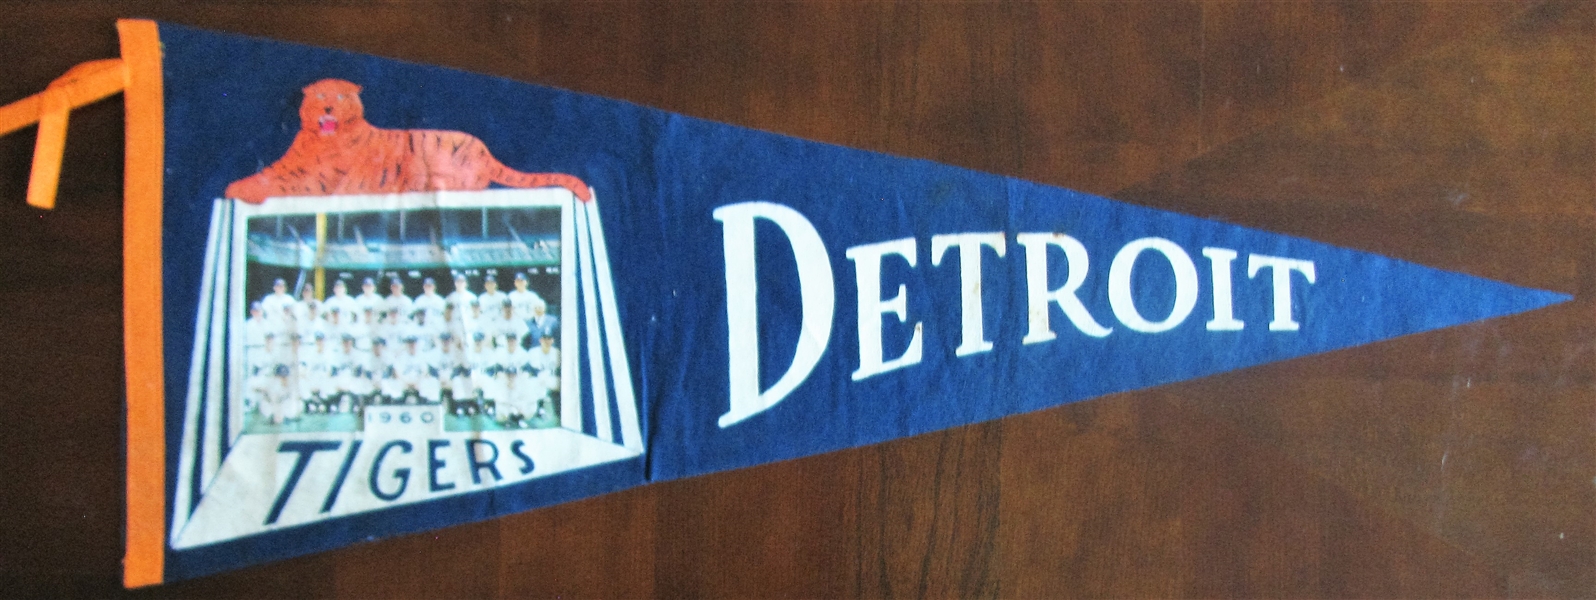 1960 DETROIT TIGERS TEAM PICTURE BASEBALL PENNANT